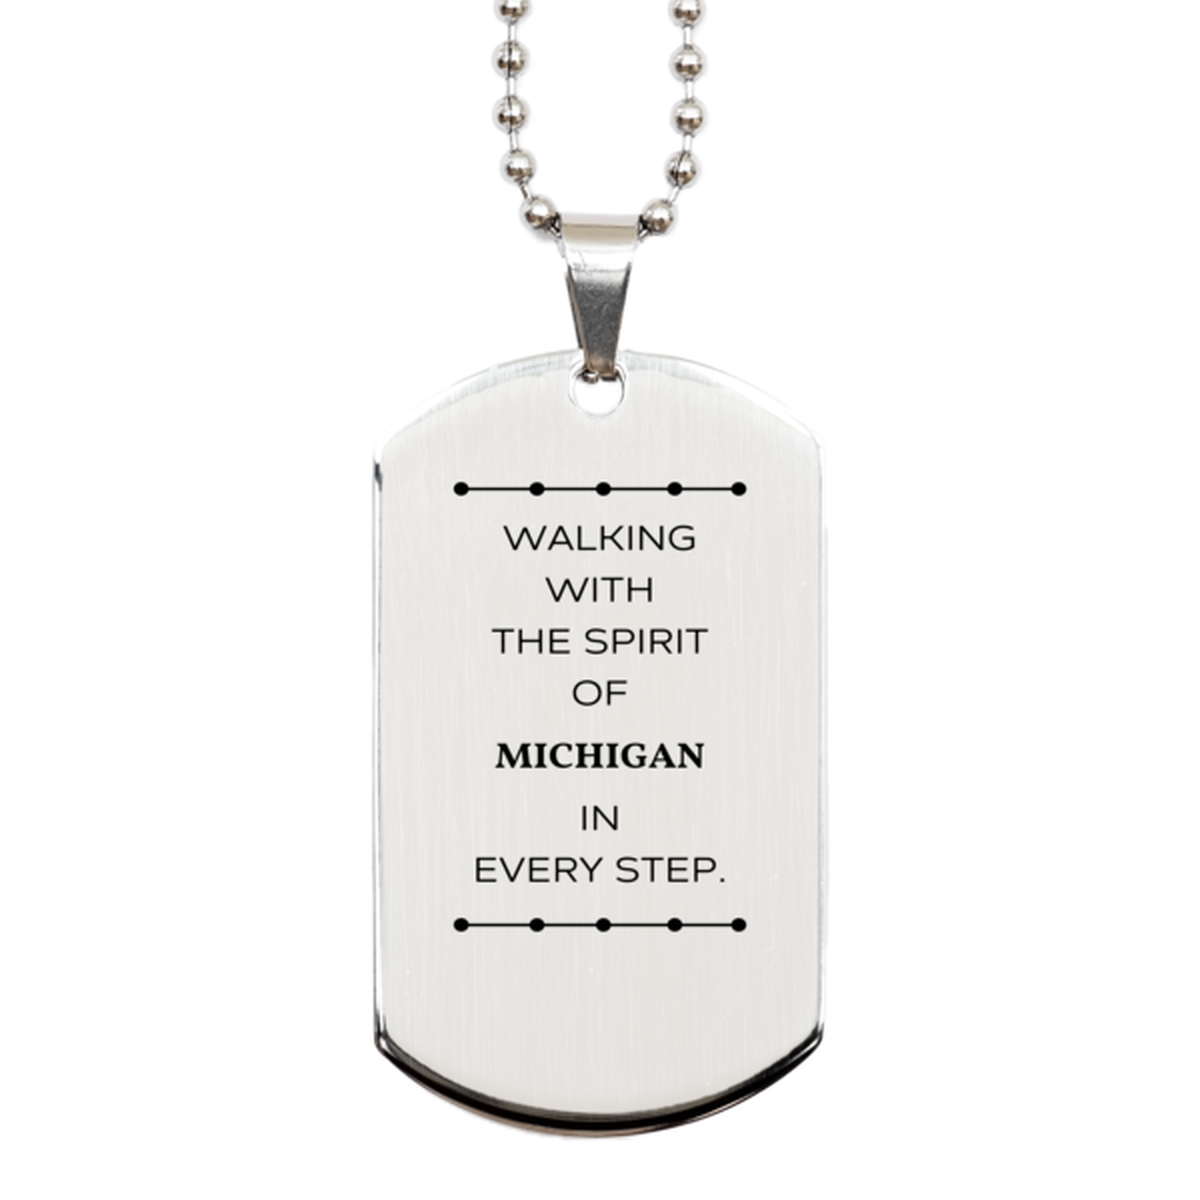 Michigan Gifts, Walking with the spirit, Love Michigan Birthday Christmas Silver Dog Tag For Michigan People, Men, Women, Friends